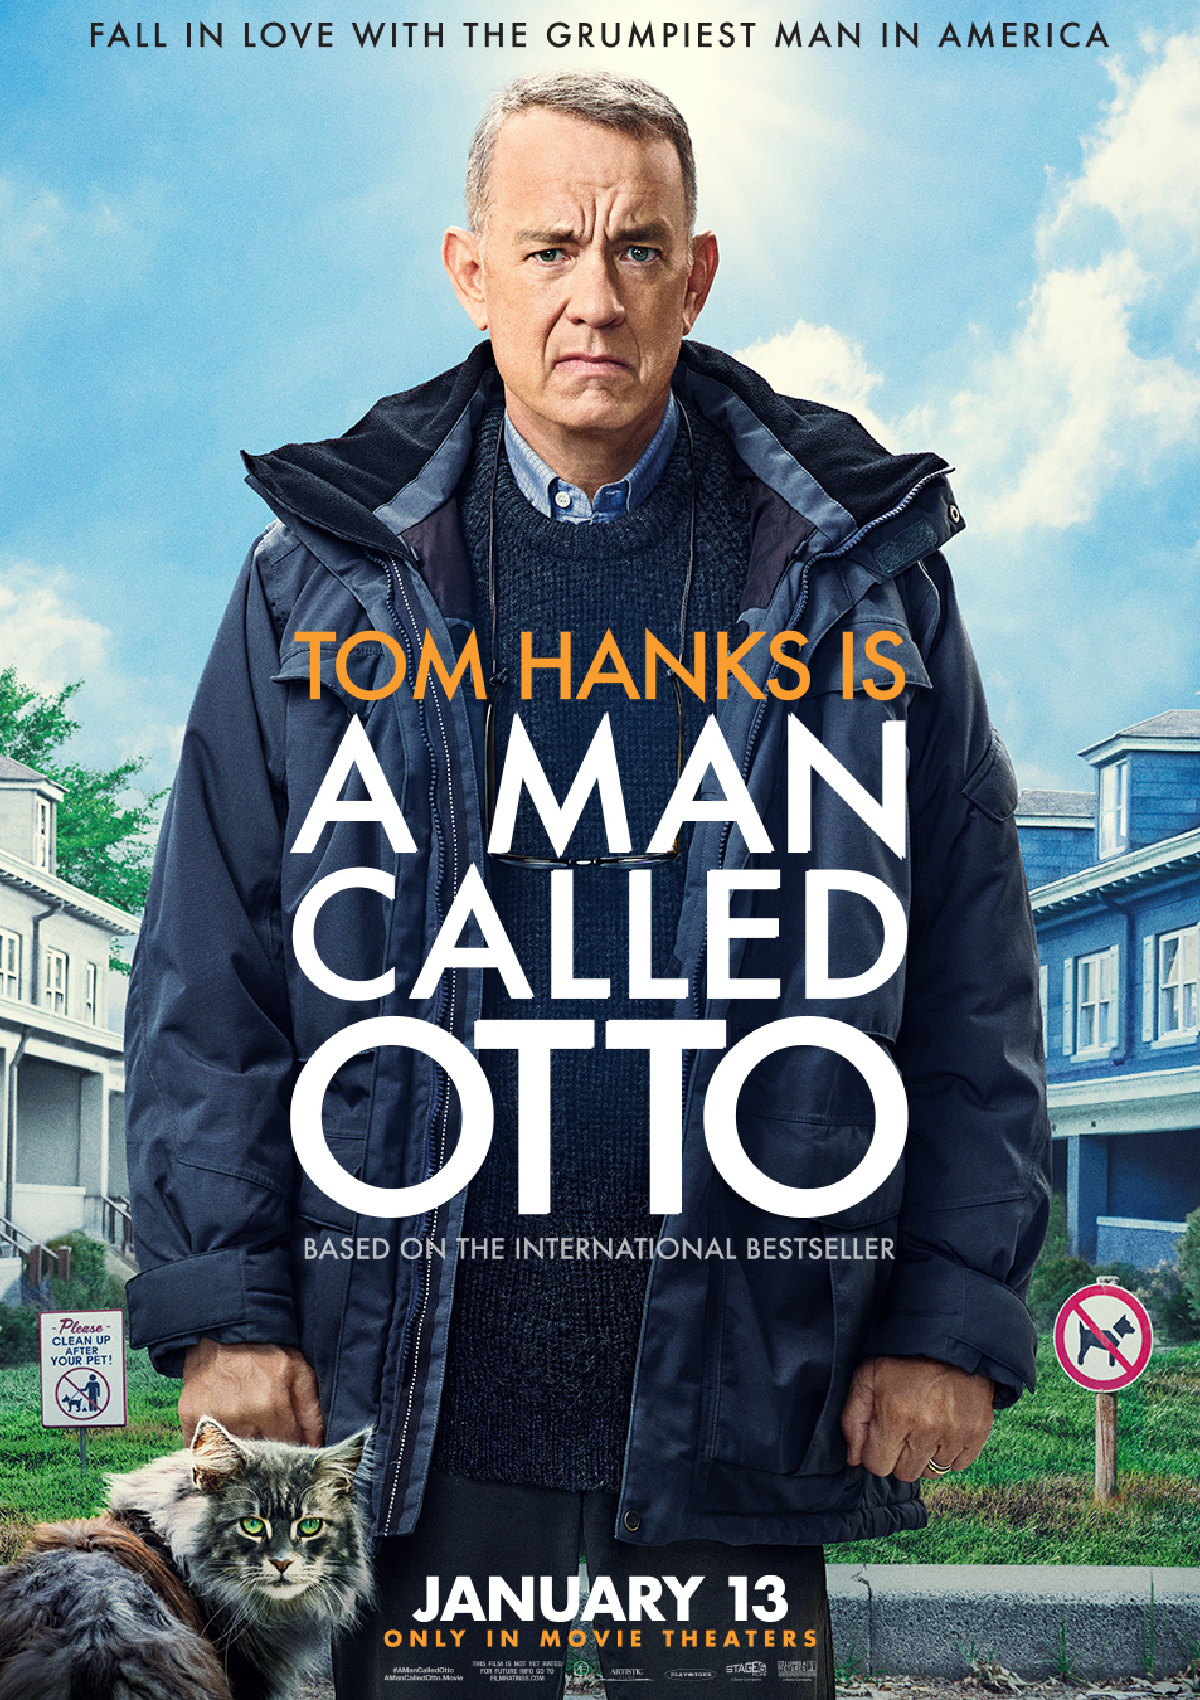 Tom Hanks in 'A Man Called Otto' from Sony Pictures.